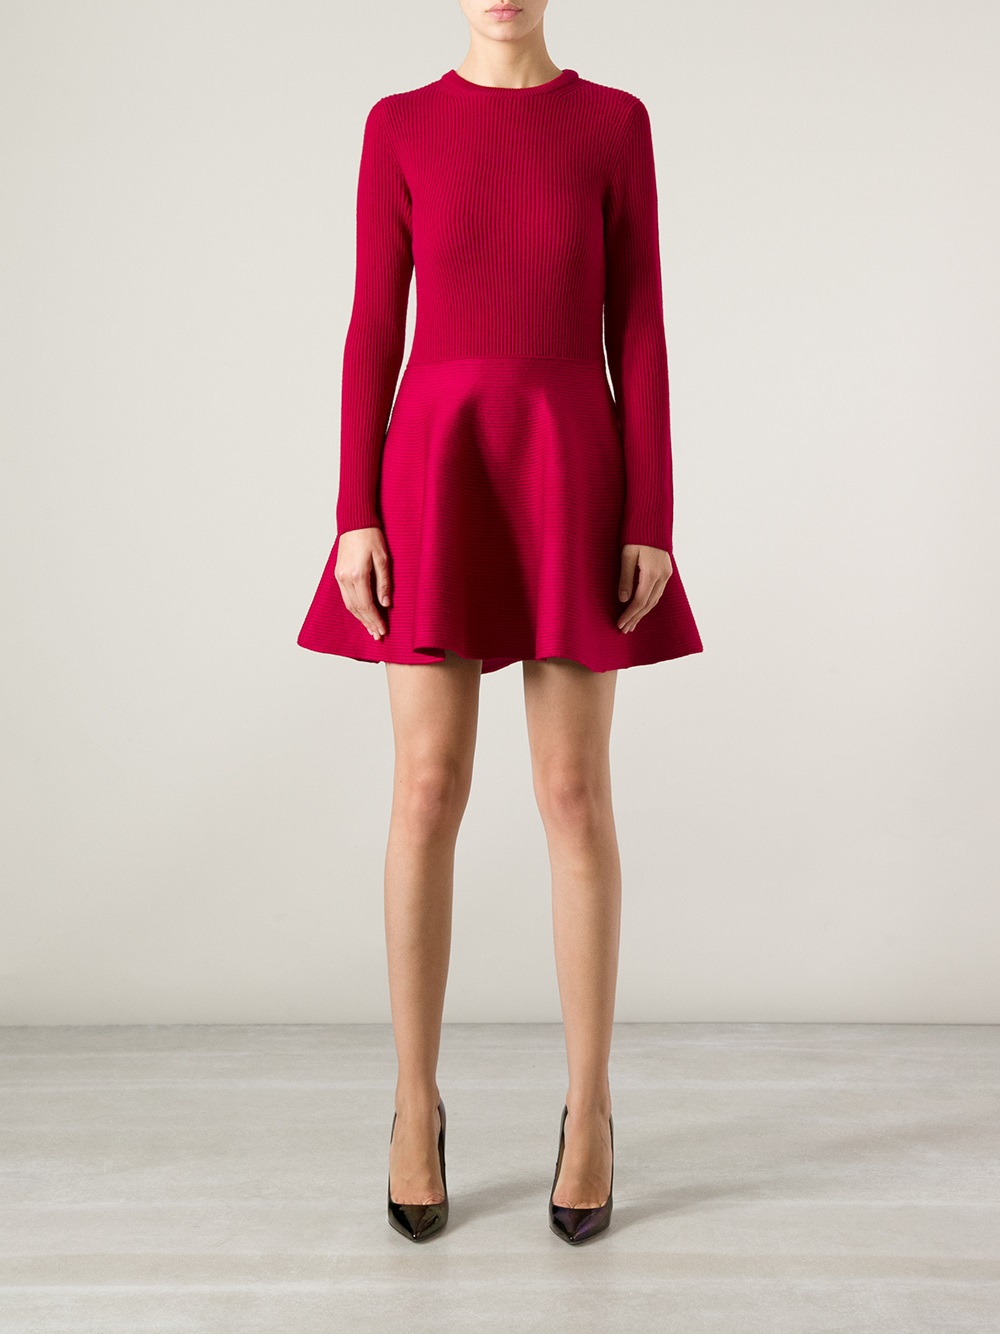 Lyst - Valentino Knitted Skater Dress in Red